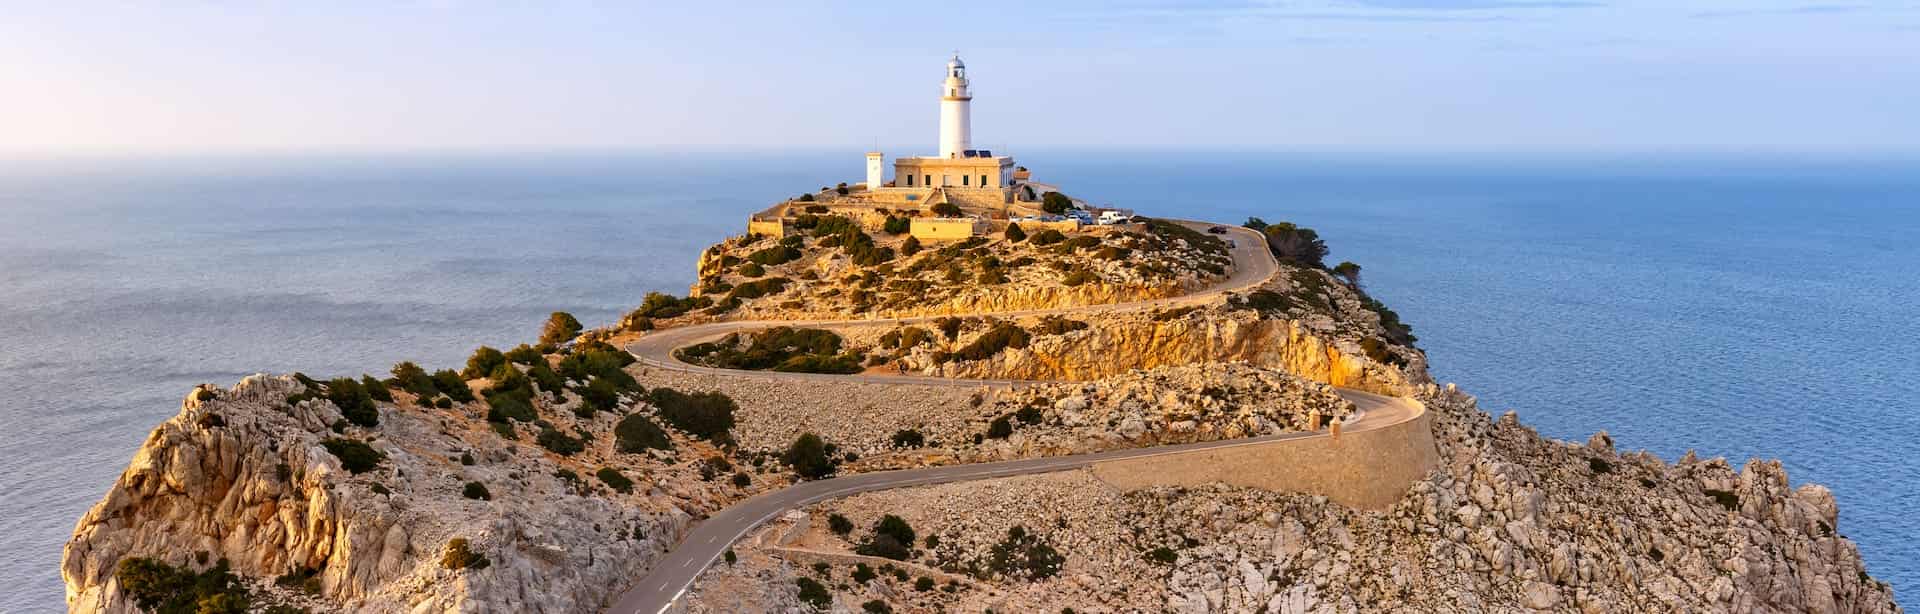 Lighthouse of Formentor in Puerto Pollensa